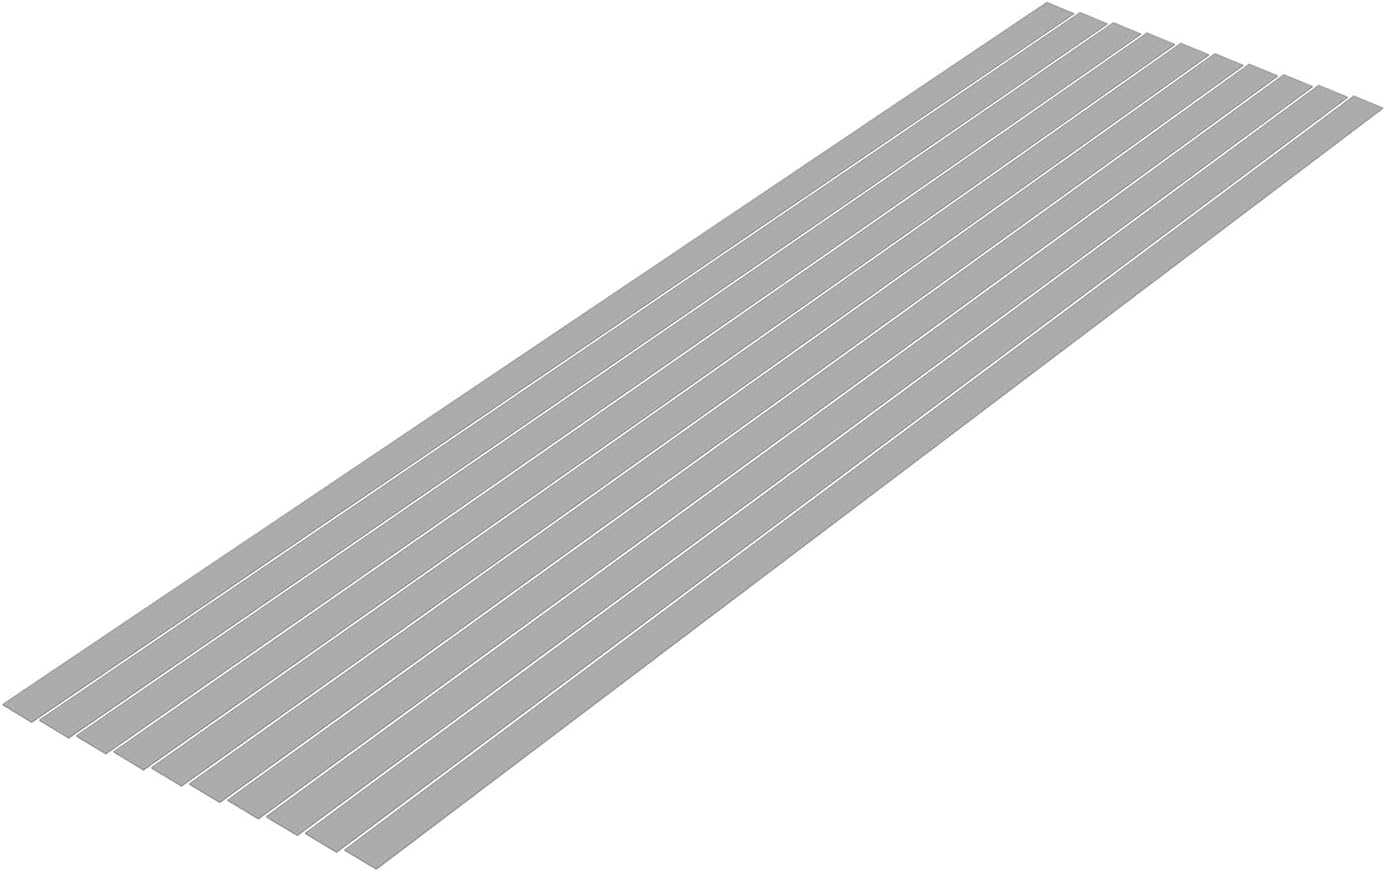 Wave OM-466 Material Series Plastic Material Gray Shredded Board 0.01 x 0.24 inches (0.3 x 6.0 mm), 10 Pieces - BanzaiHobby